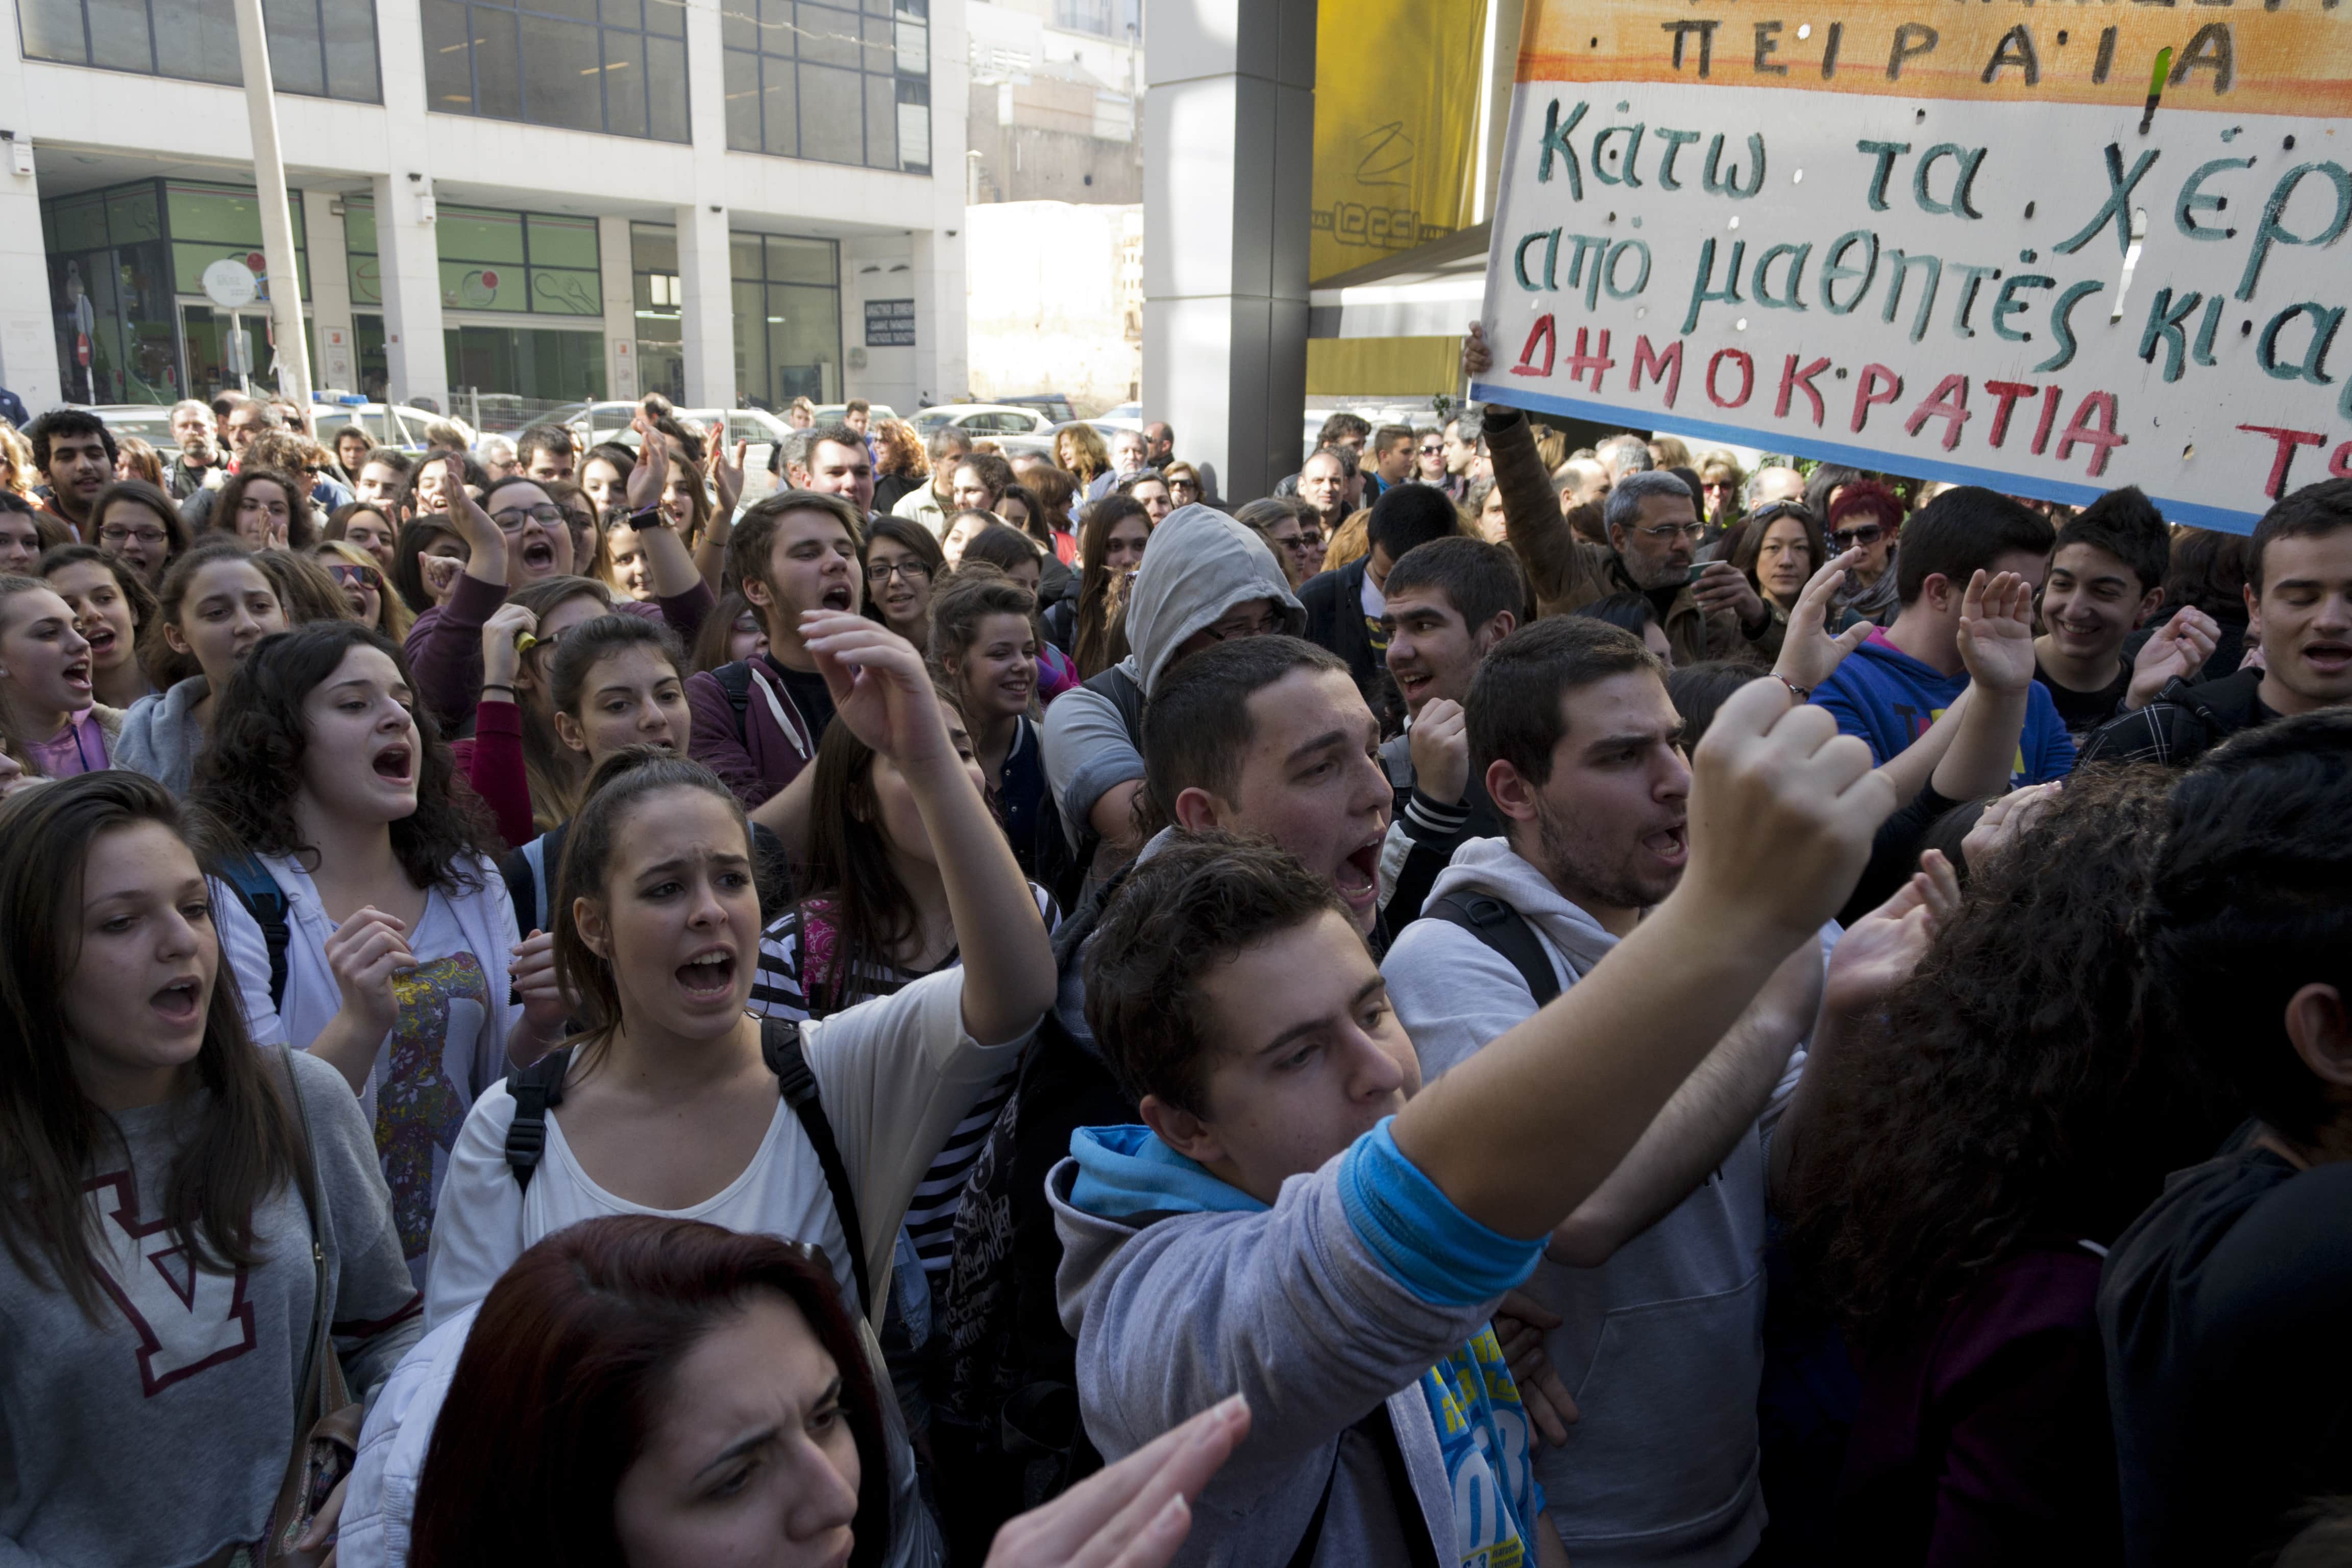 Students gather outside the court in Piraeus to protest police calling them to ask sensitive questions about their political beliefs and financial status., Nikolas Georgiou/Demotix